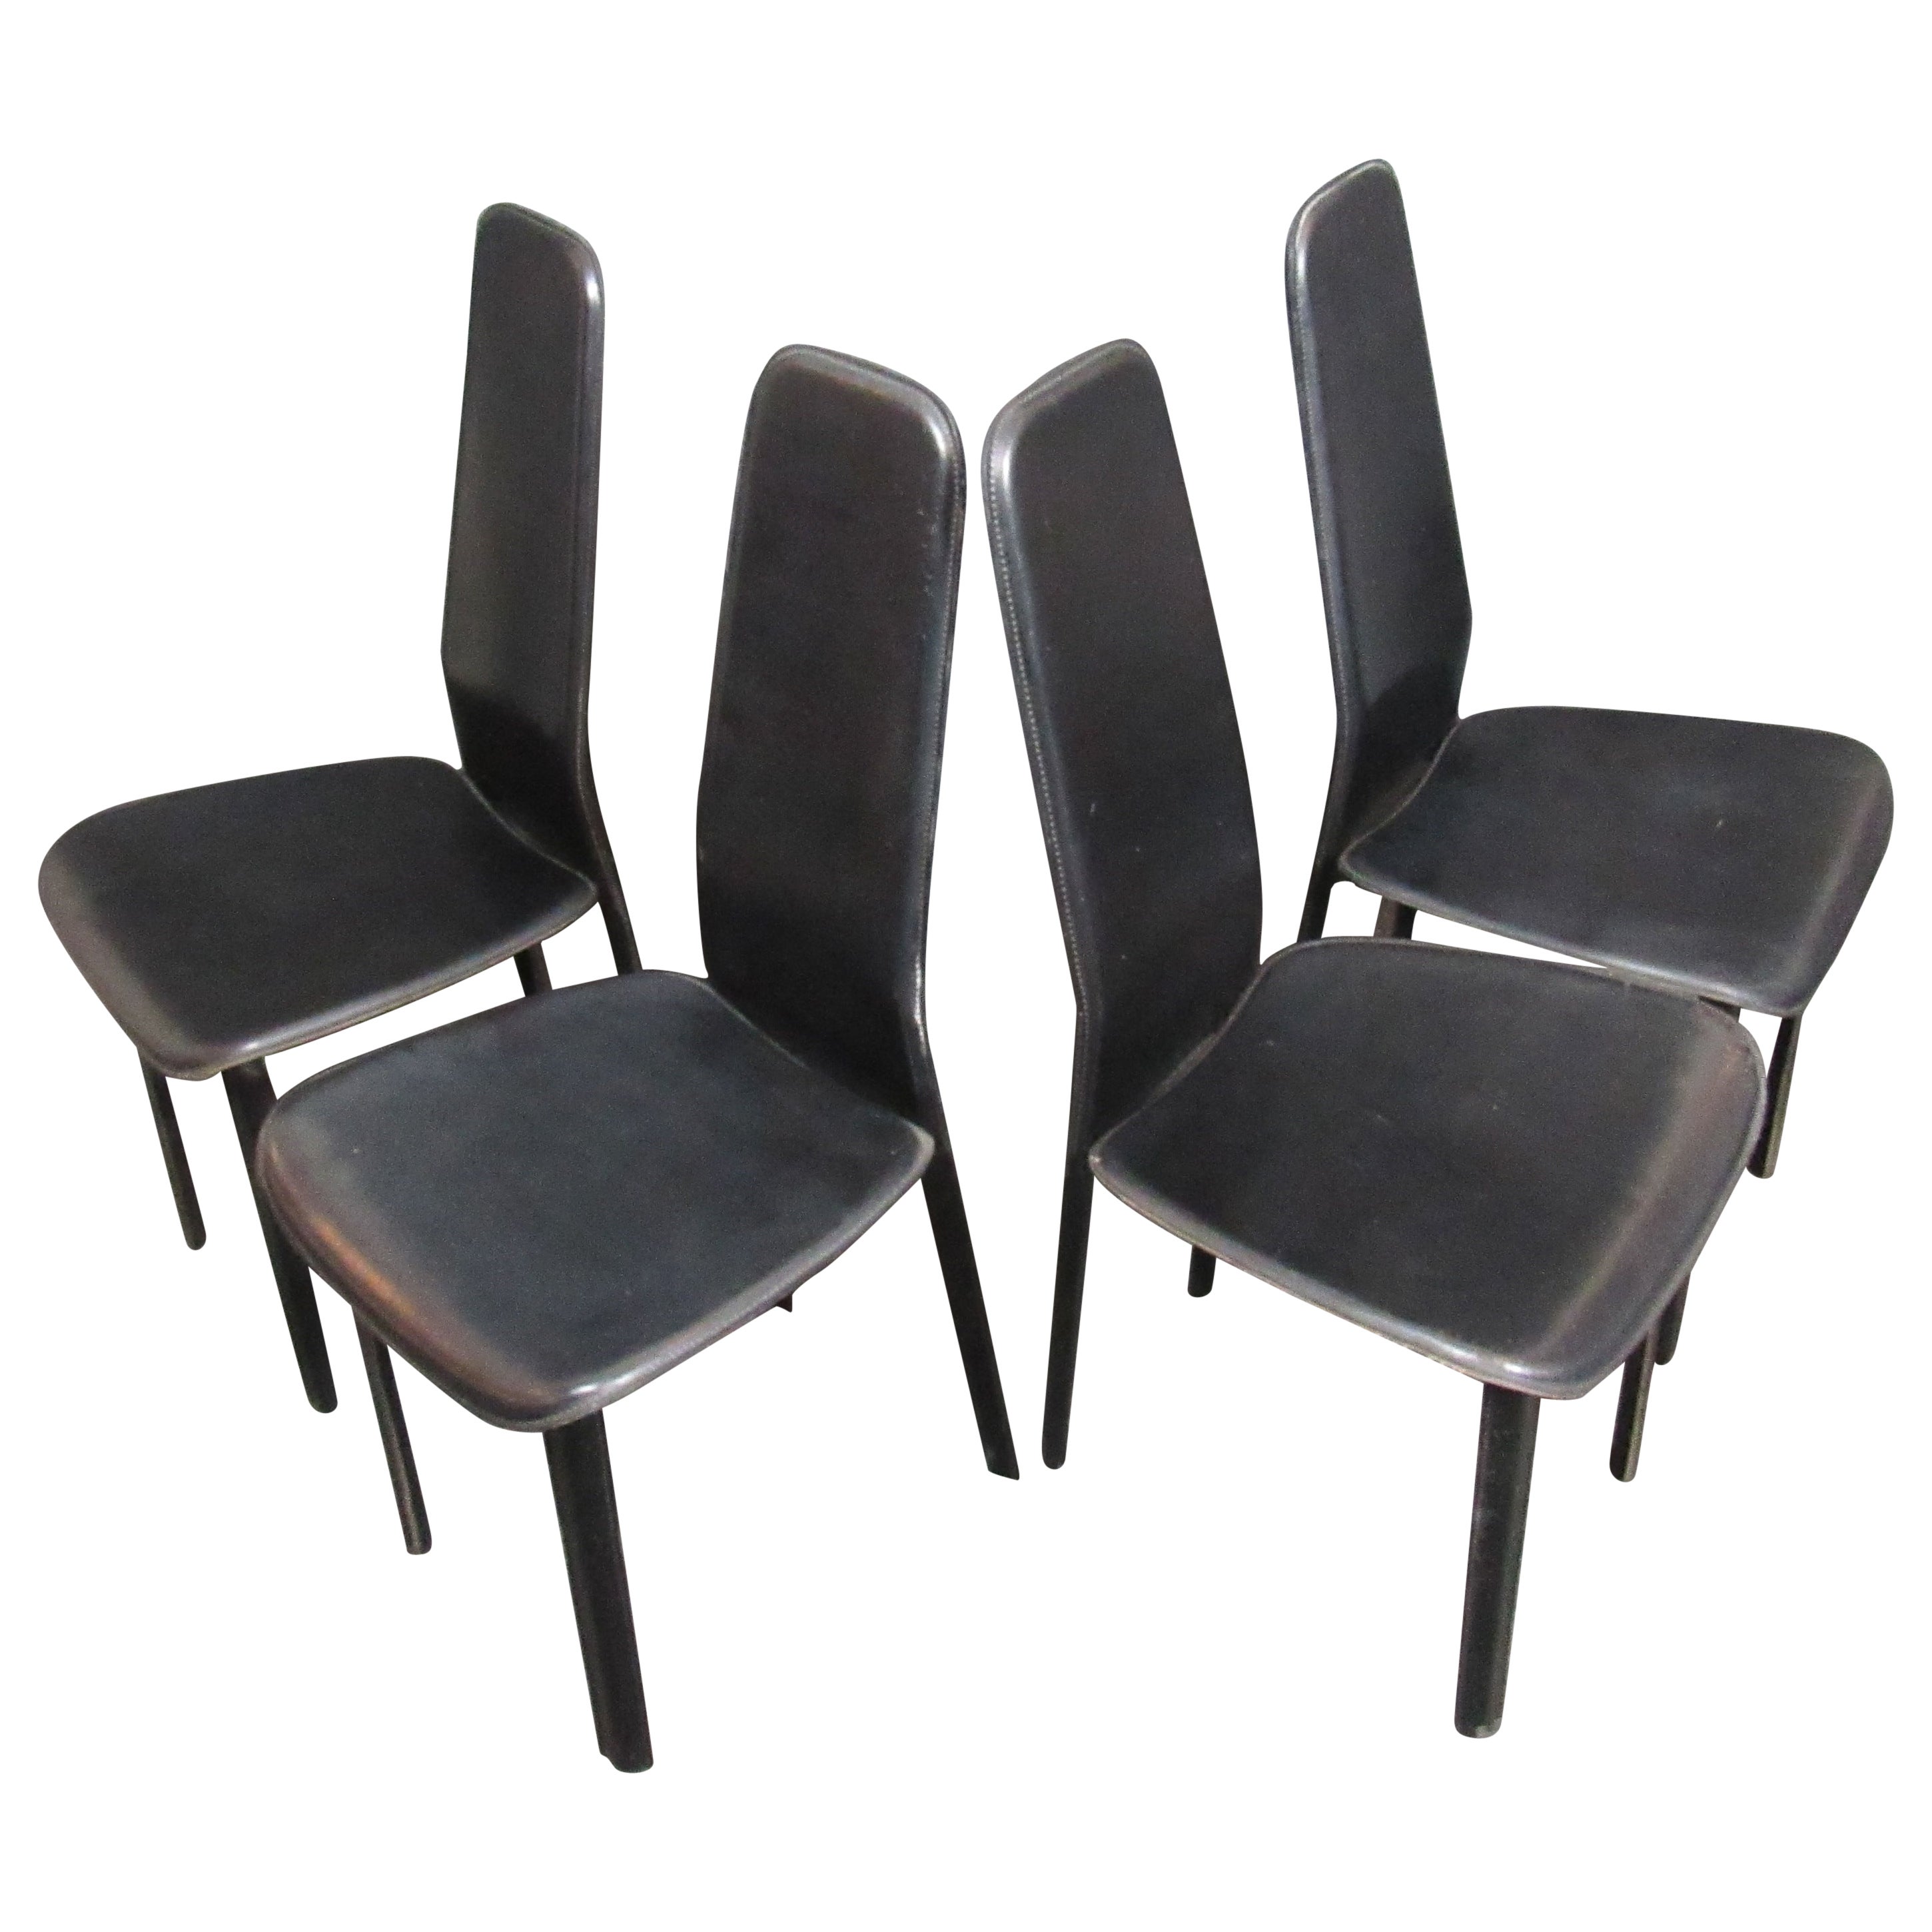 Set of 4 Italian Dining Chairs by Cidue